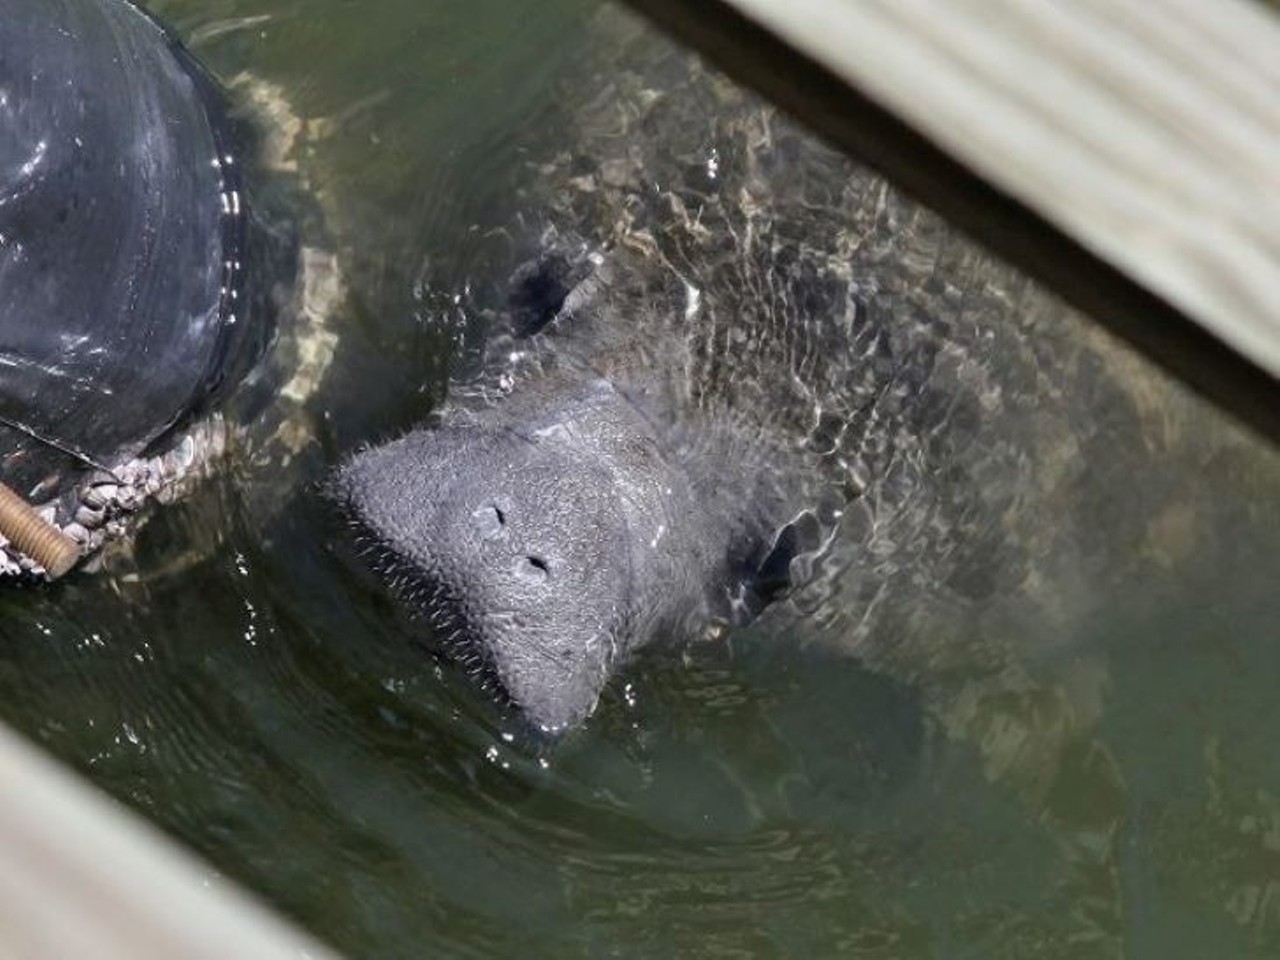  Manatee Viewing Center 
6990 Dickman Rd Apollo Beach, FL 33572,  813-228-4289 
Despite Manatee season only being a few months long, Tampa Electric Manatee Viewing Center offers year round activities and scenic views including a butterfly garden, a wildlife observation tower, and  mangrove-packed nature trail. 
Photo via  Manatee Viewing Center/Tampa